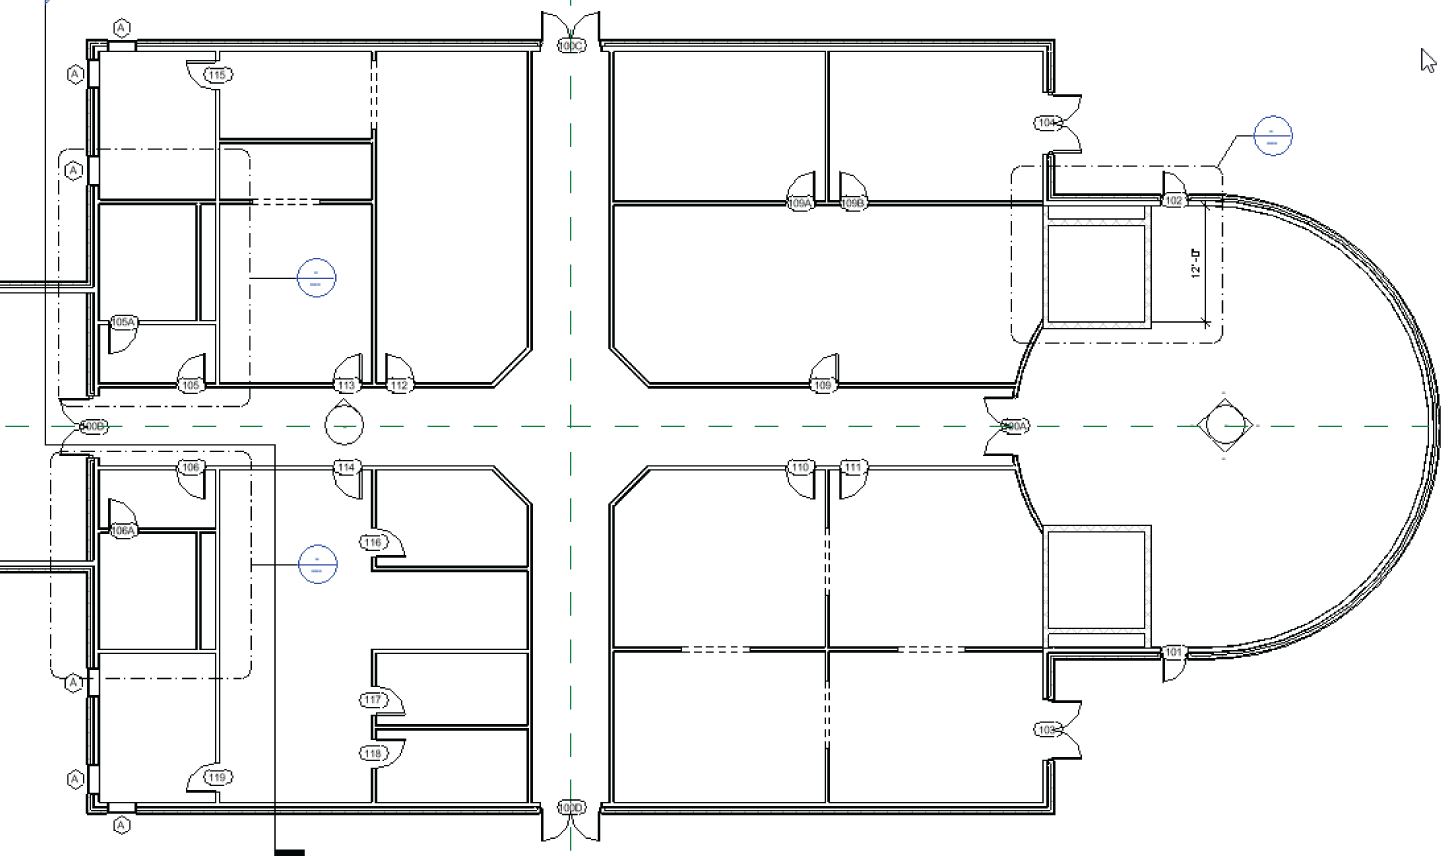 The first-floor layout for the east wing